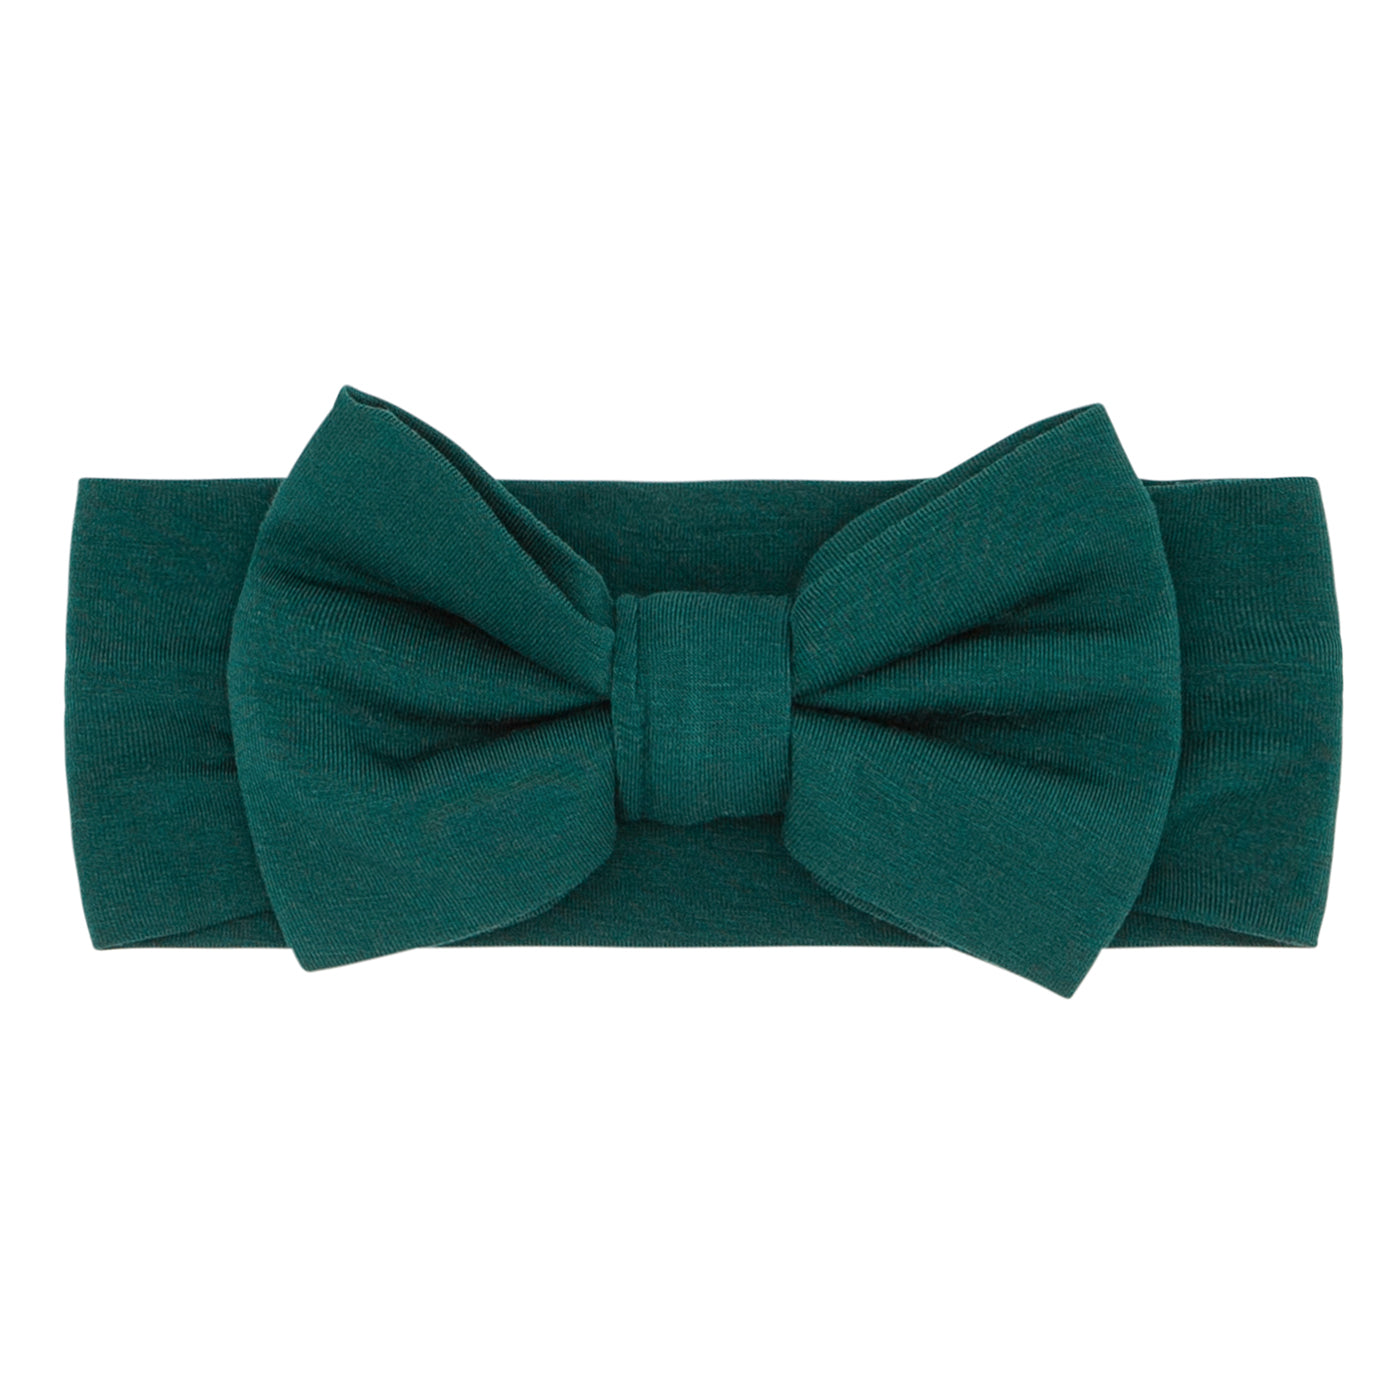 Flat lay image of an Emerald luxe bow headband